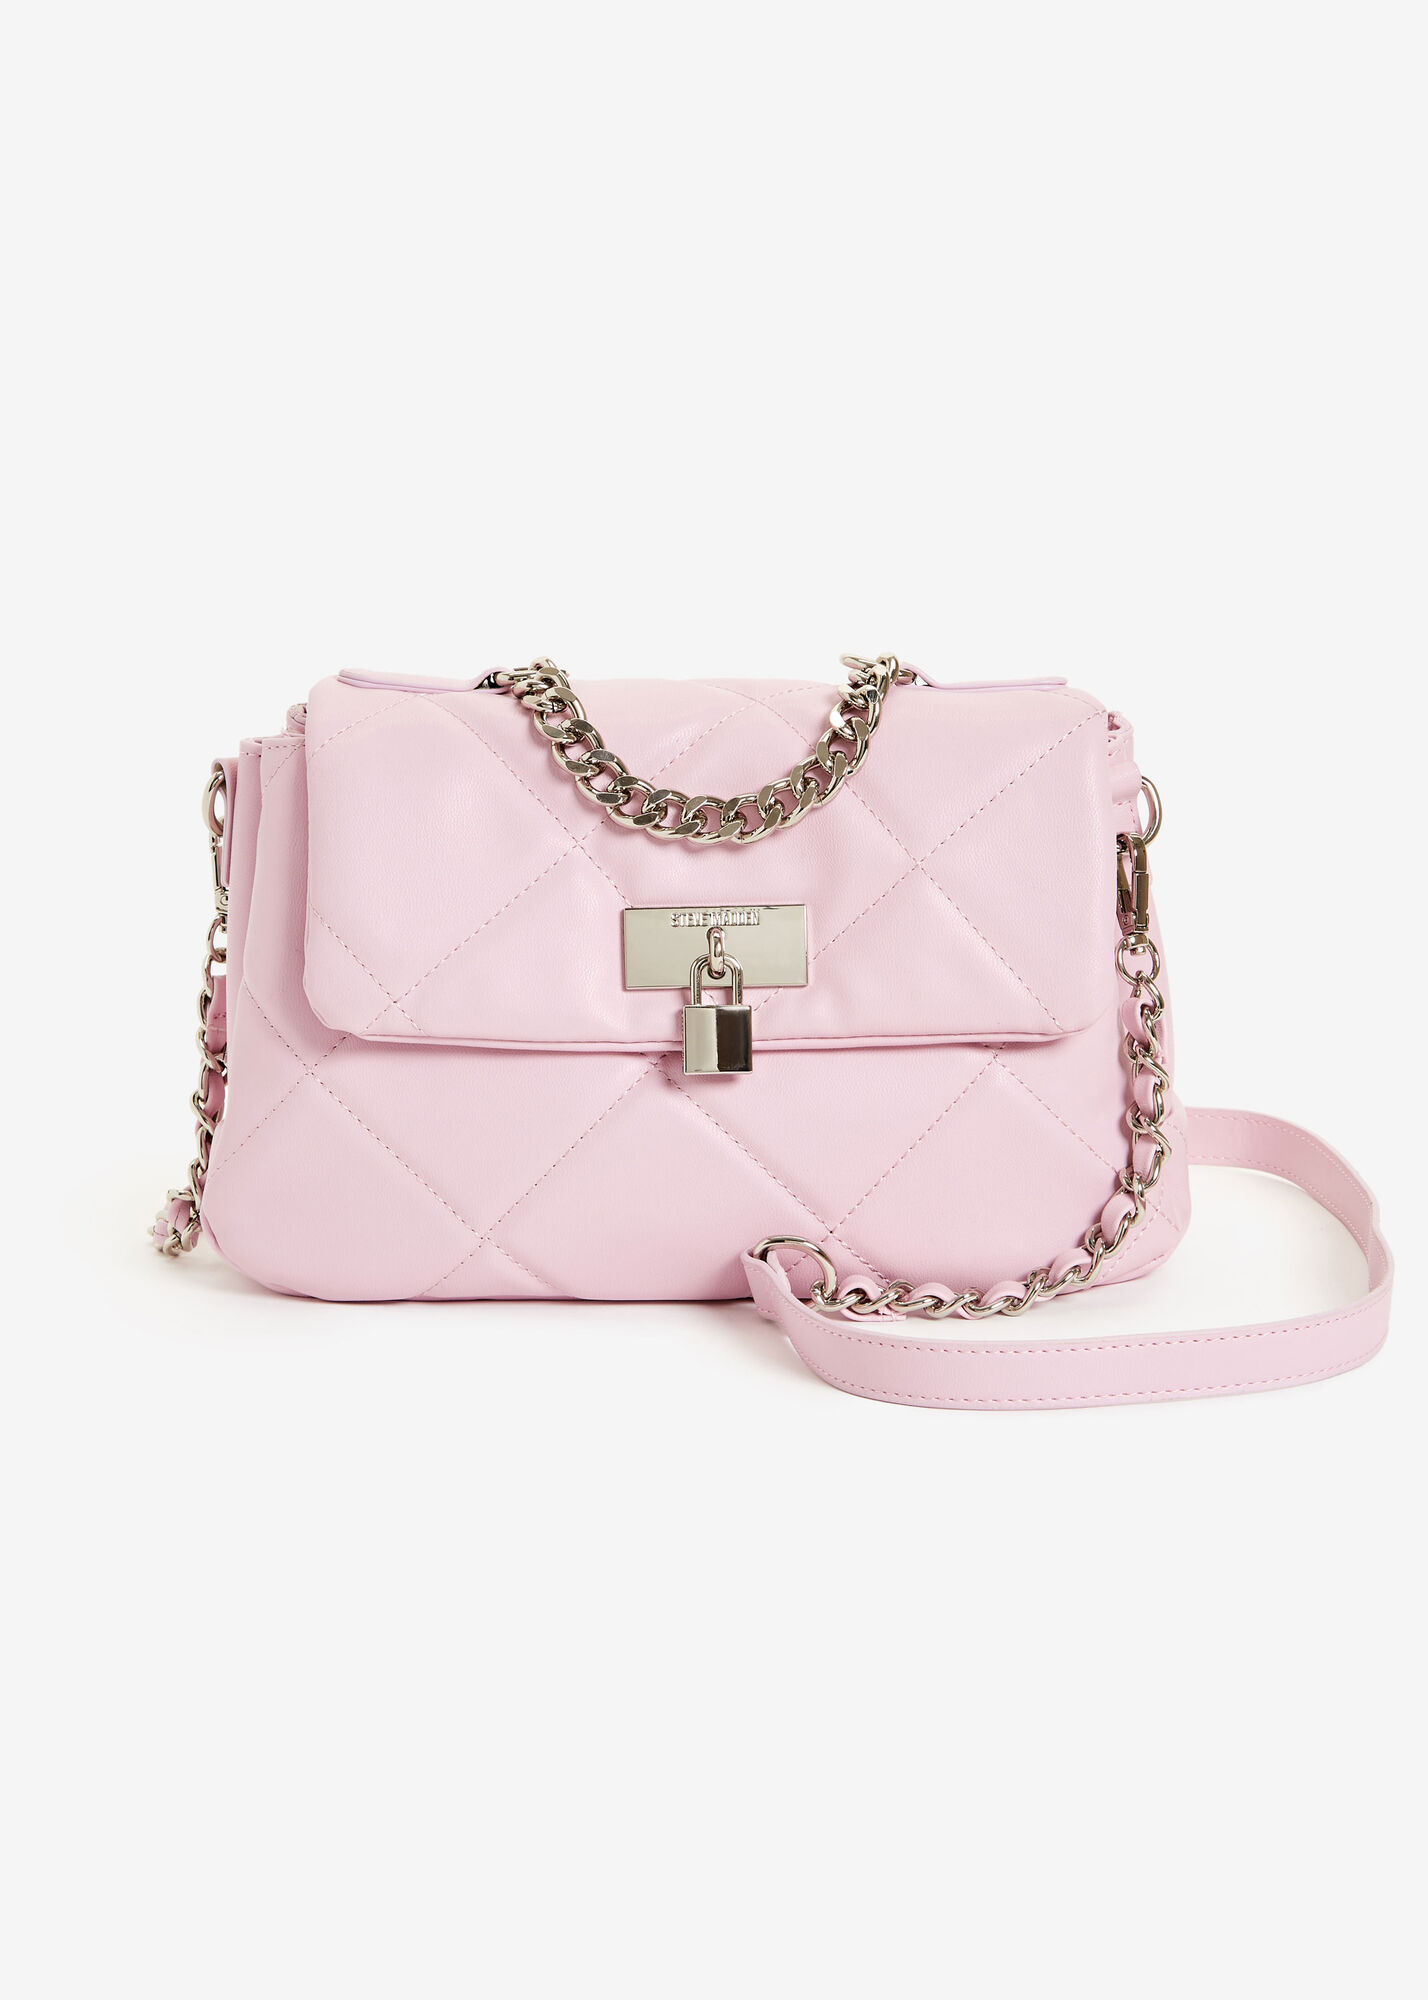 Steve Madden Bterra-g quilted teddy cross body in pink - ShopStyle